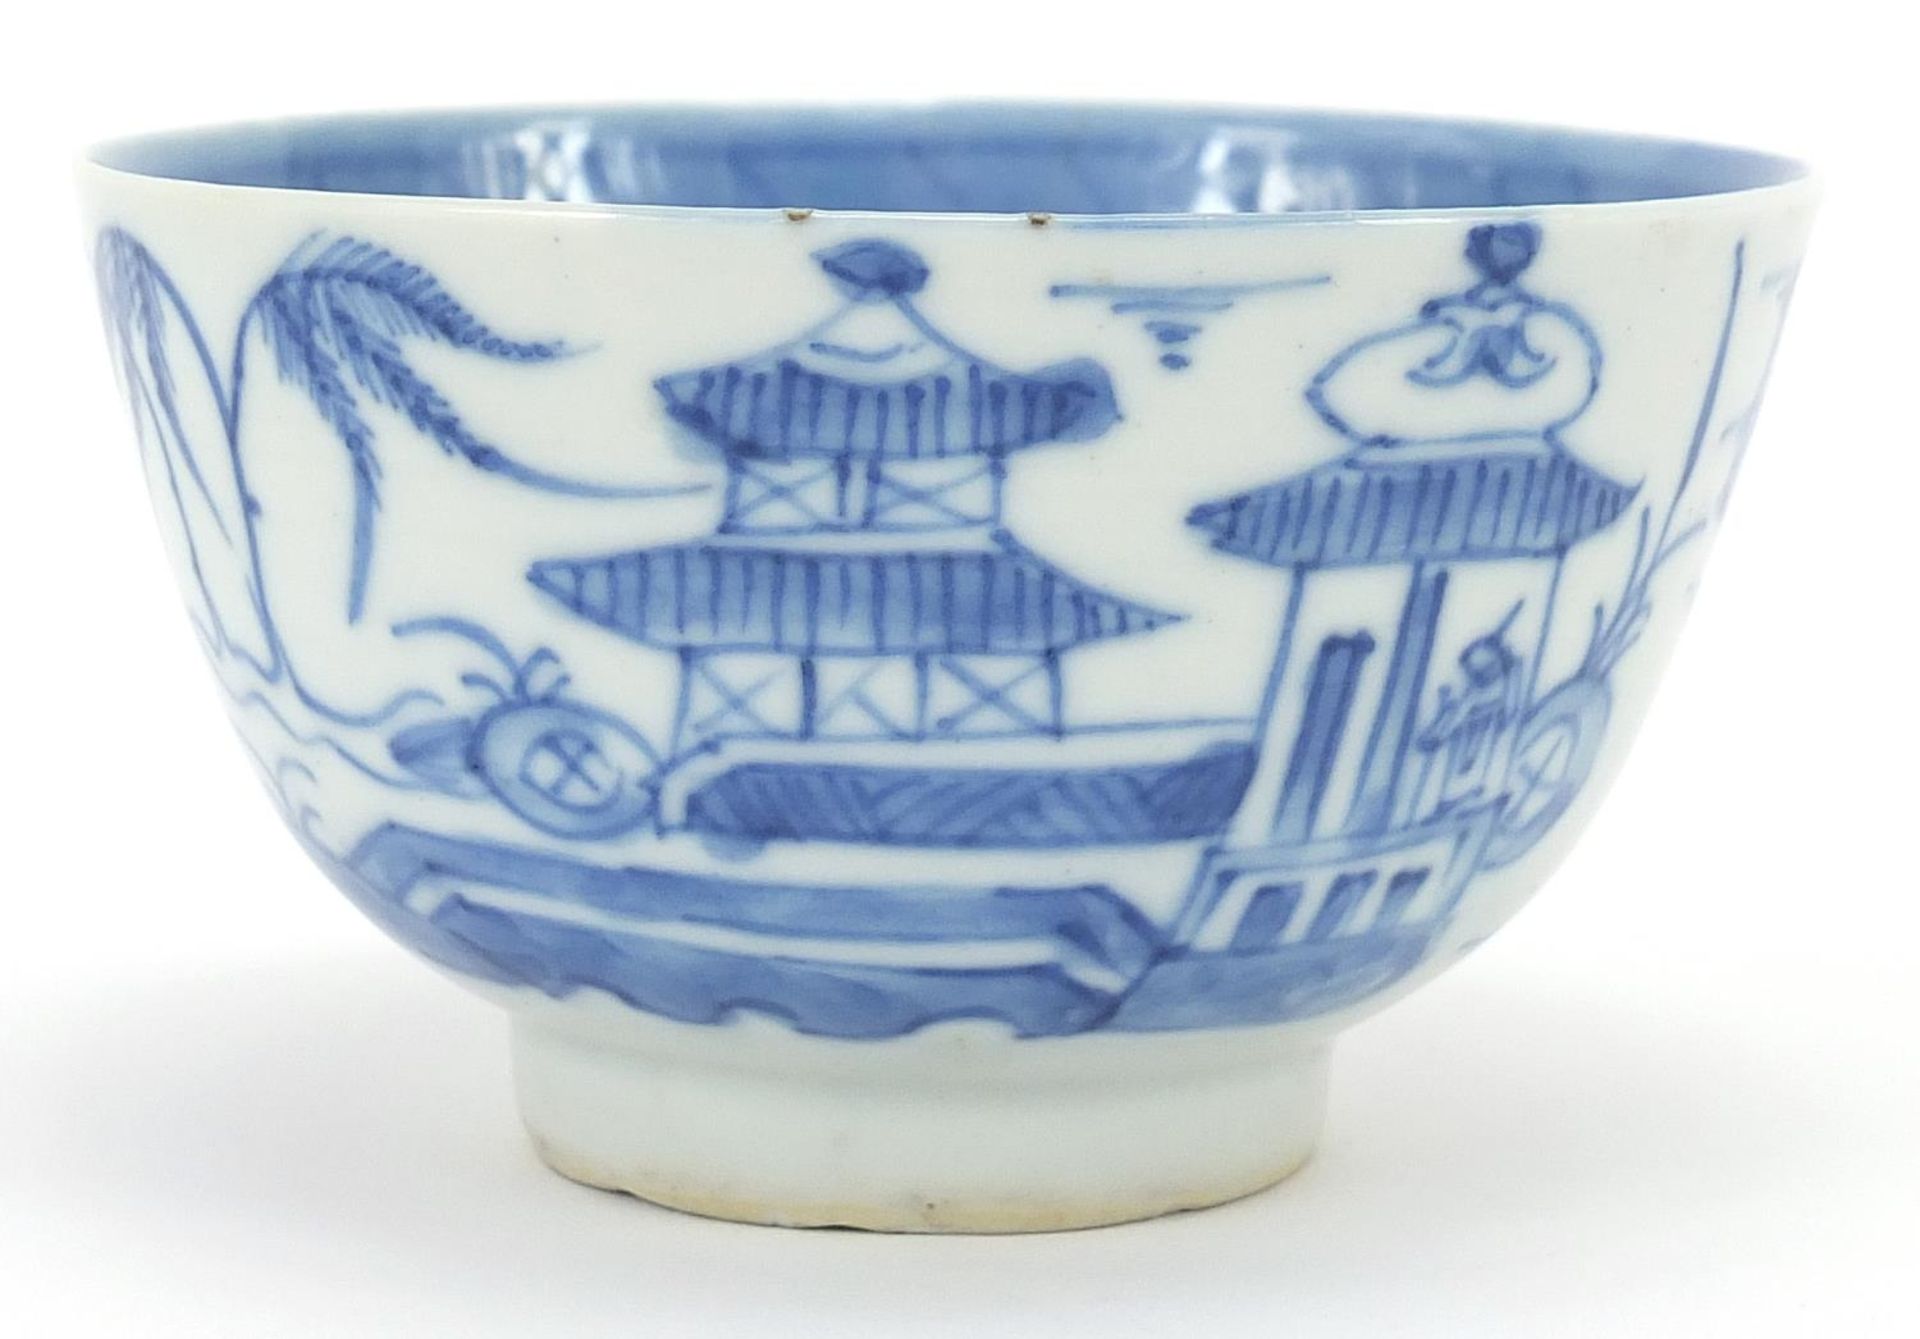 Chinese blue and white porcelain bowl hand painted with a river landscape, 9.5cm in diameter